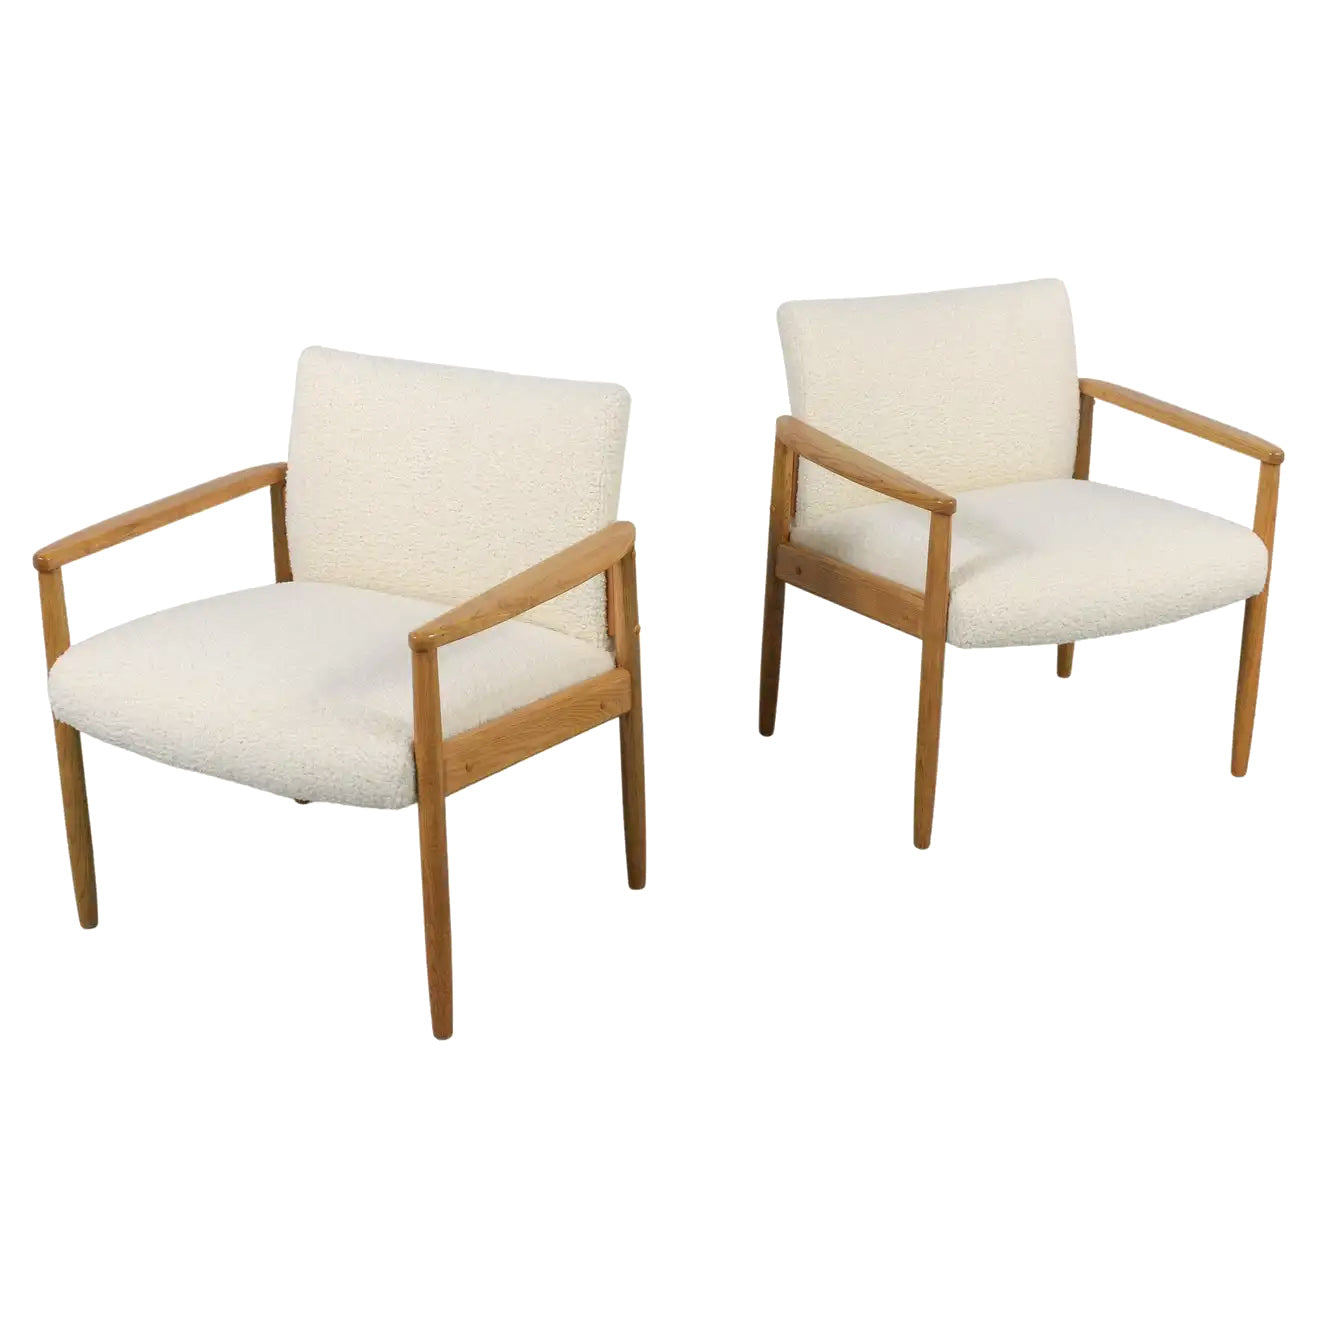 Set of Two Vintage Mid-Century Modern Lounge Chairs